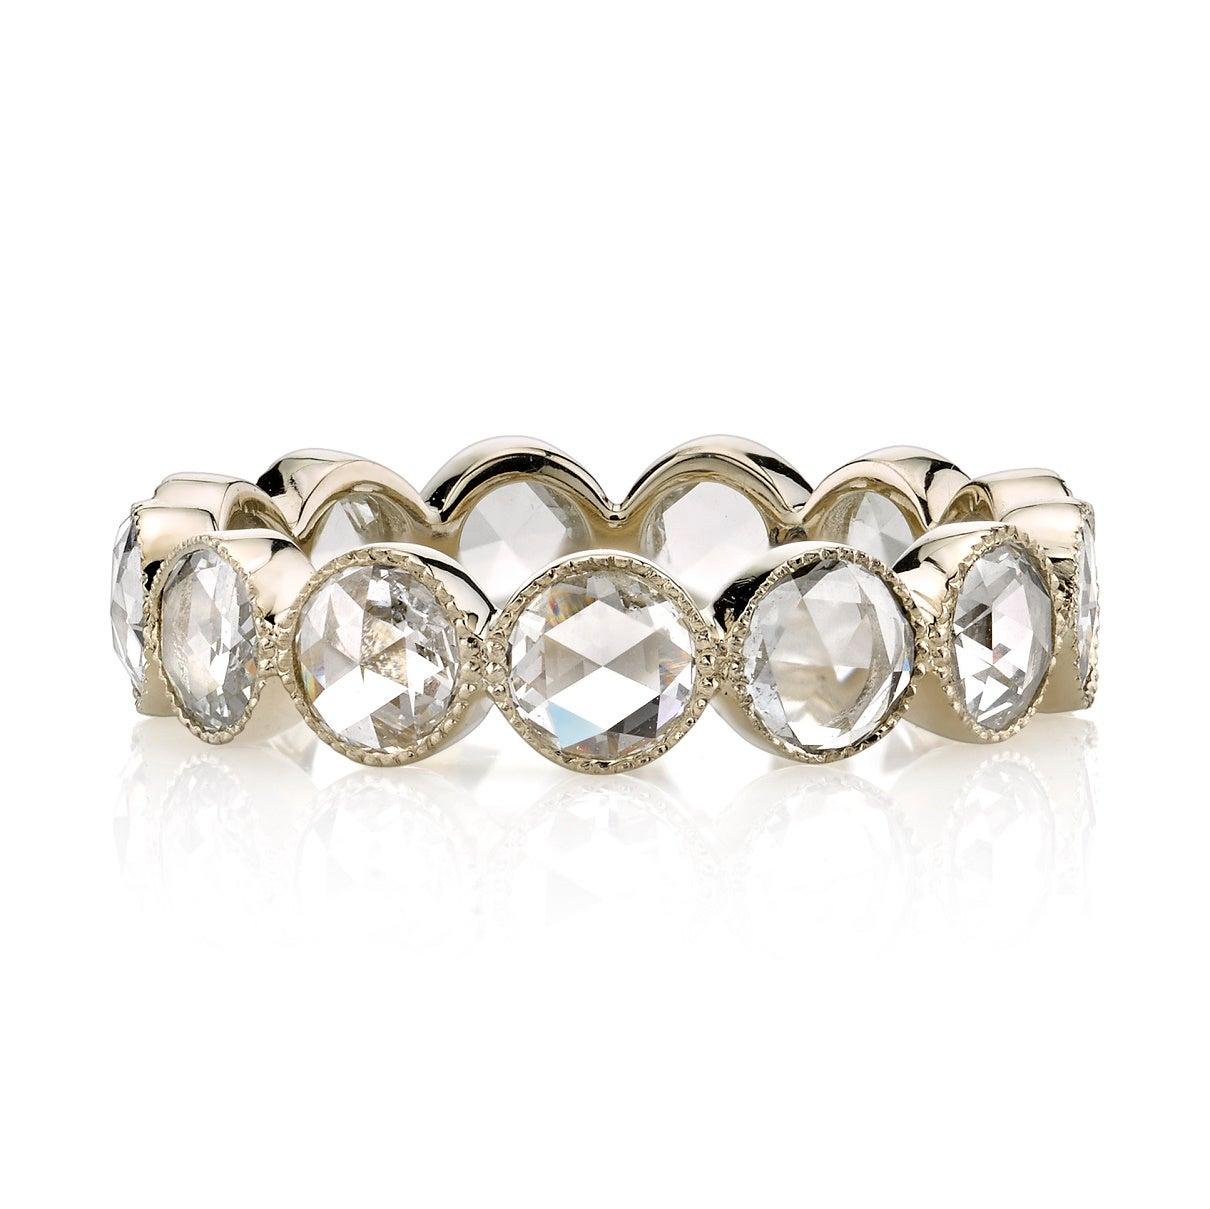 For Sale:  Handcrafted Gabby Rose Cut Diamond Eternity Band by Single Stone 3